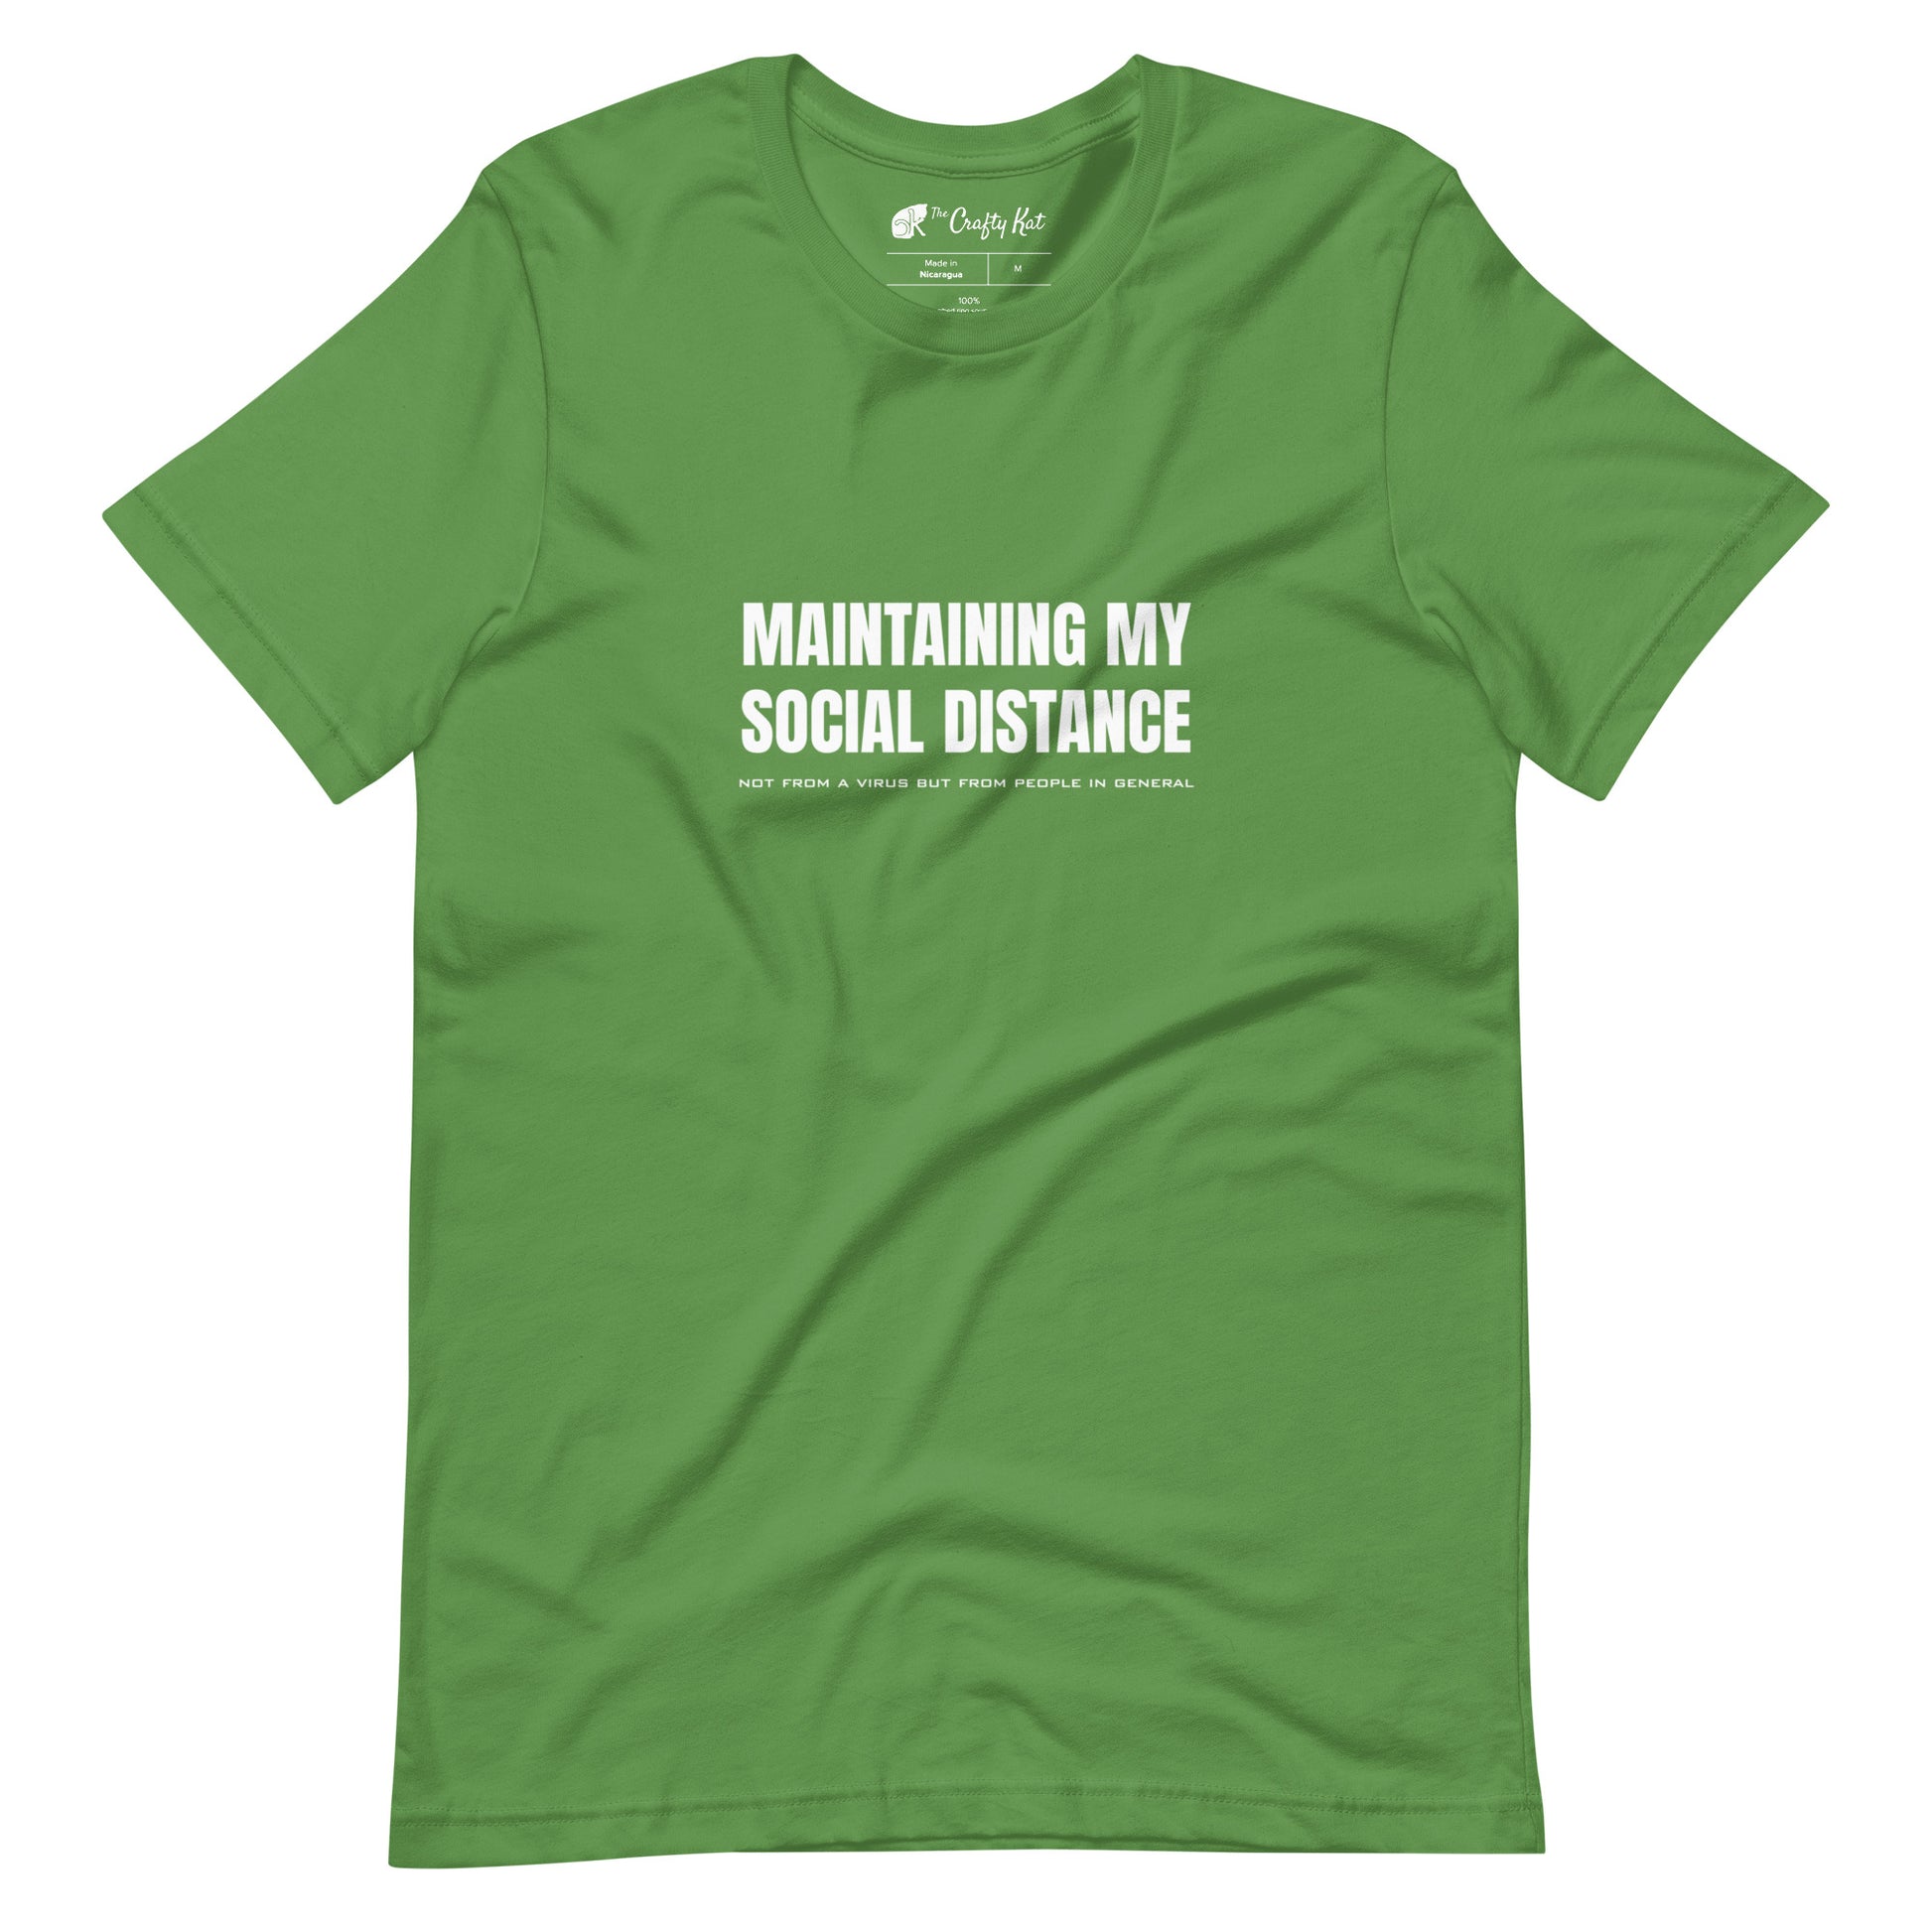 Leaf green t-shirt with white graphic: "MAINTAINING MY SOCIAL DISTANCE not from a virus but from people in general"